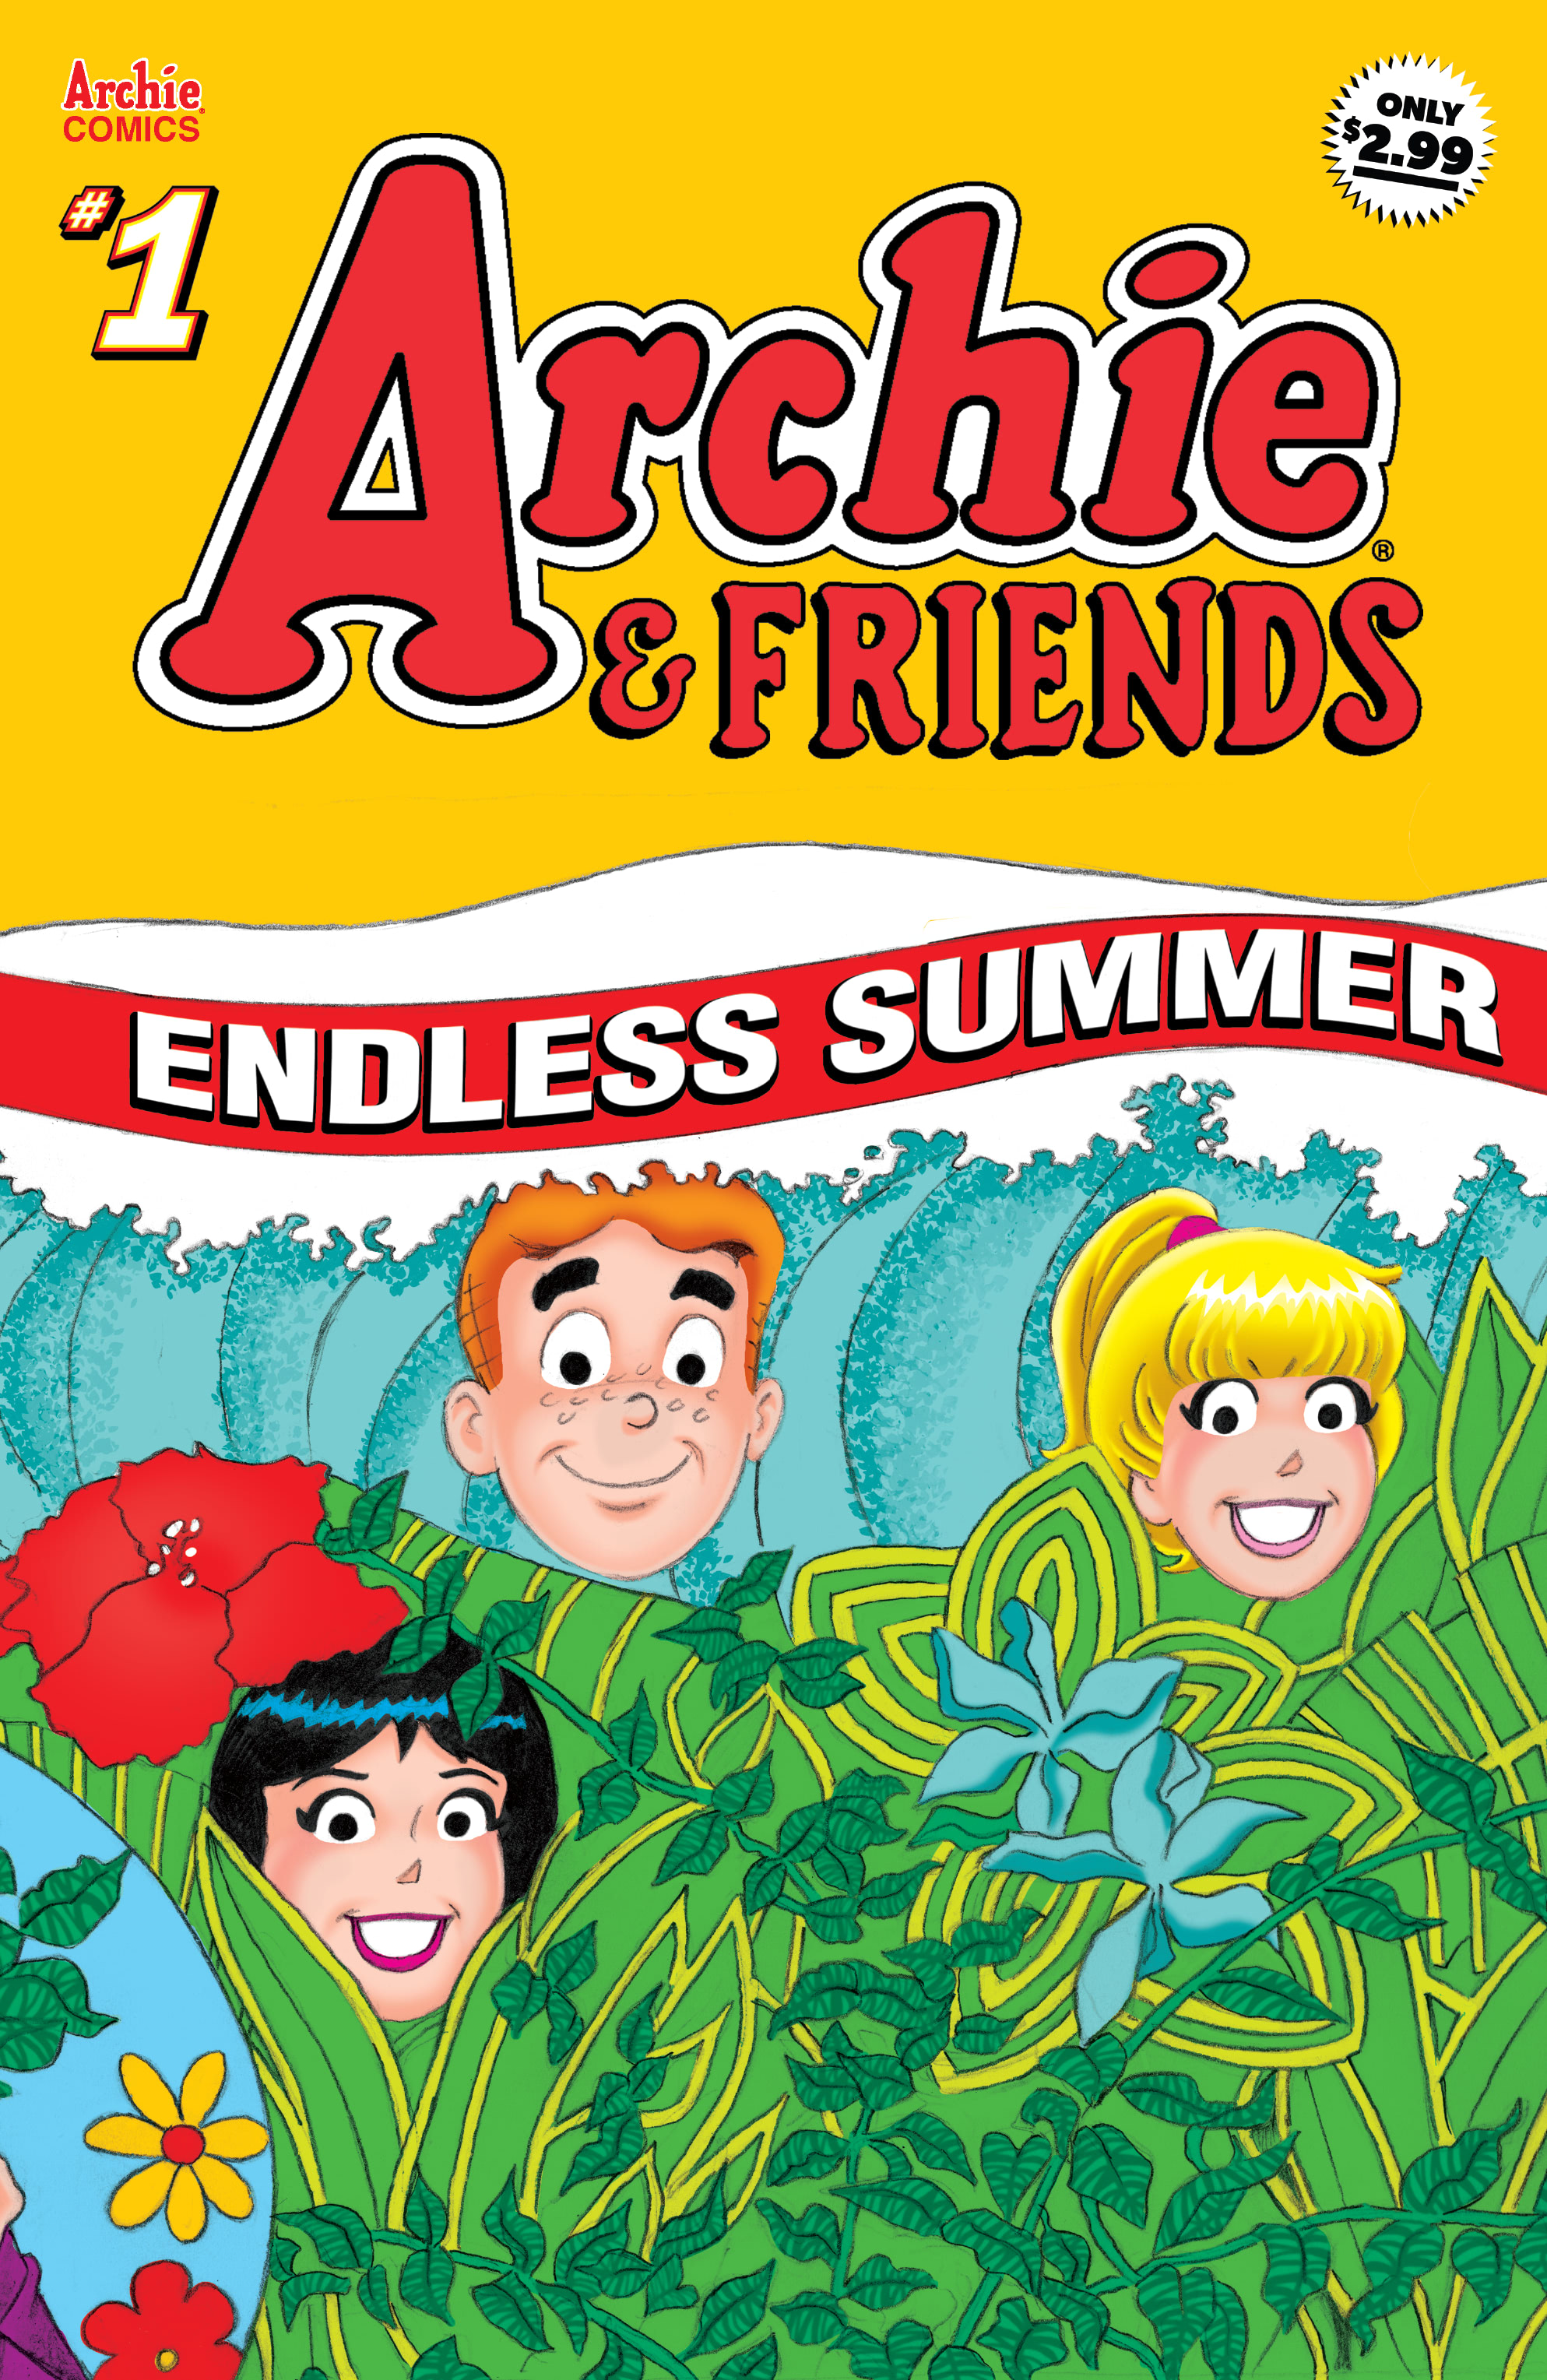 Read online Archie & Friends (2019) comic -  Issue # Endless Summer - 1